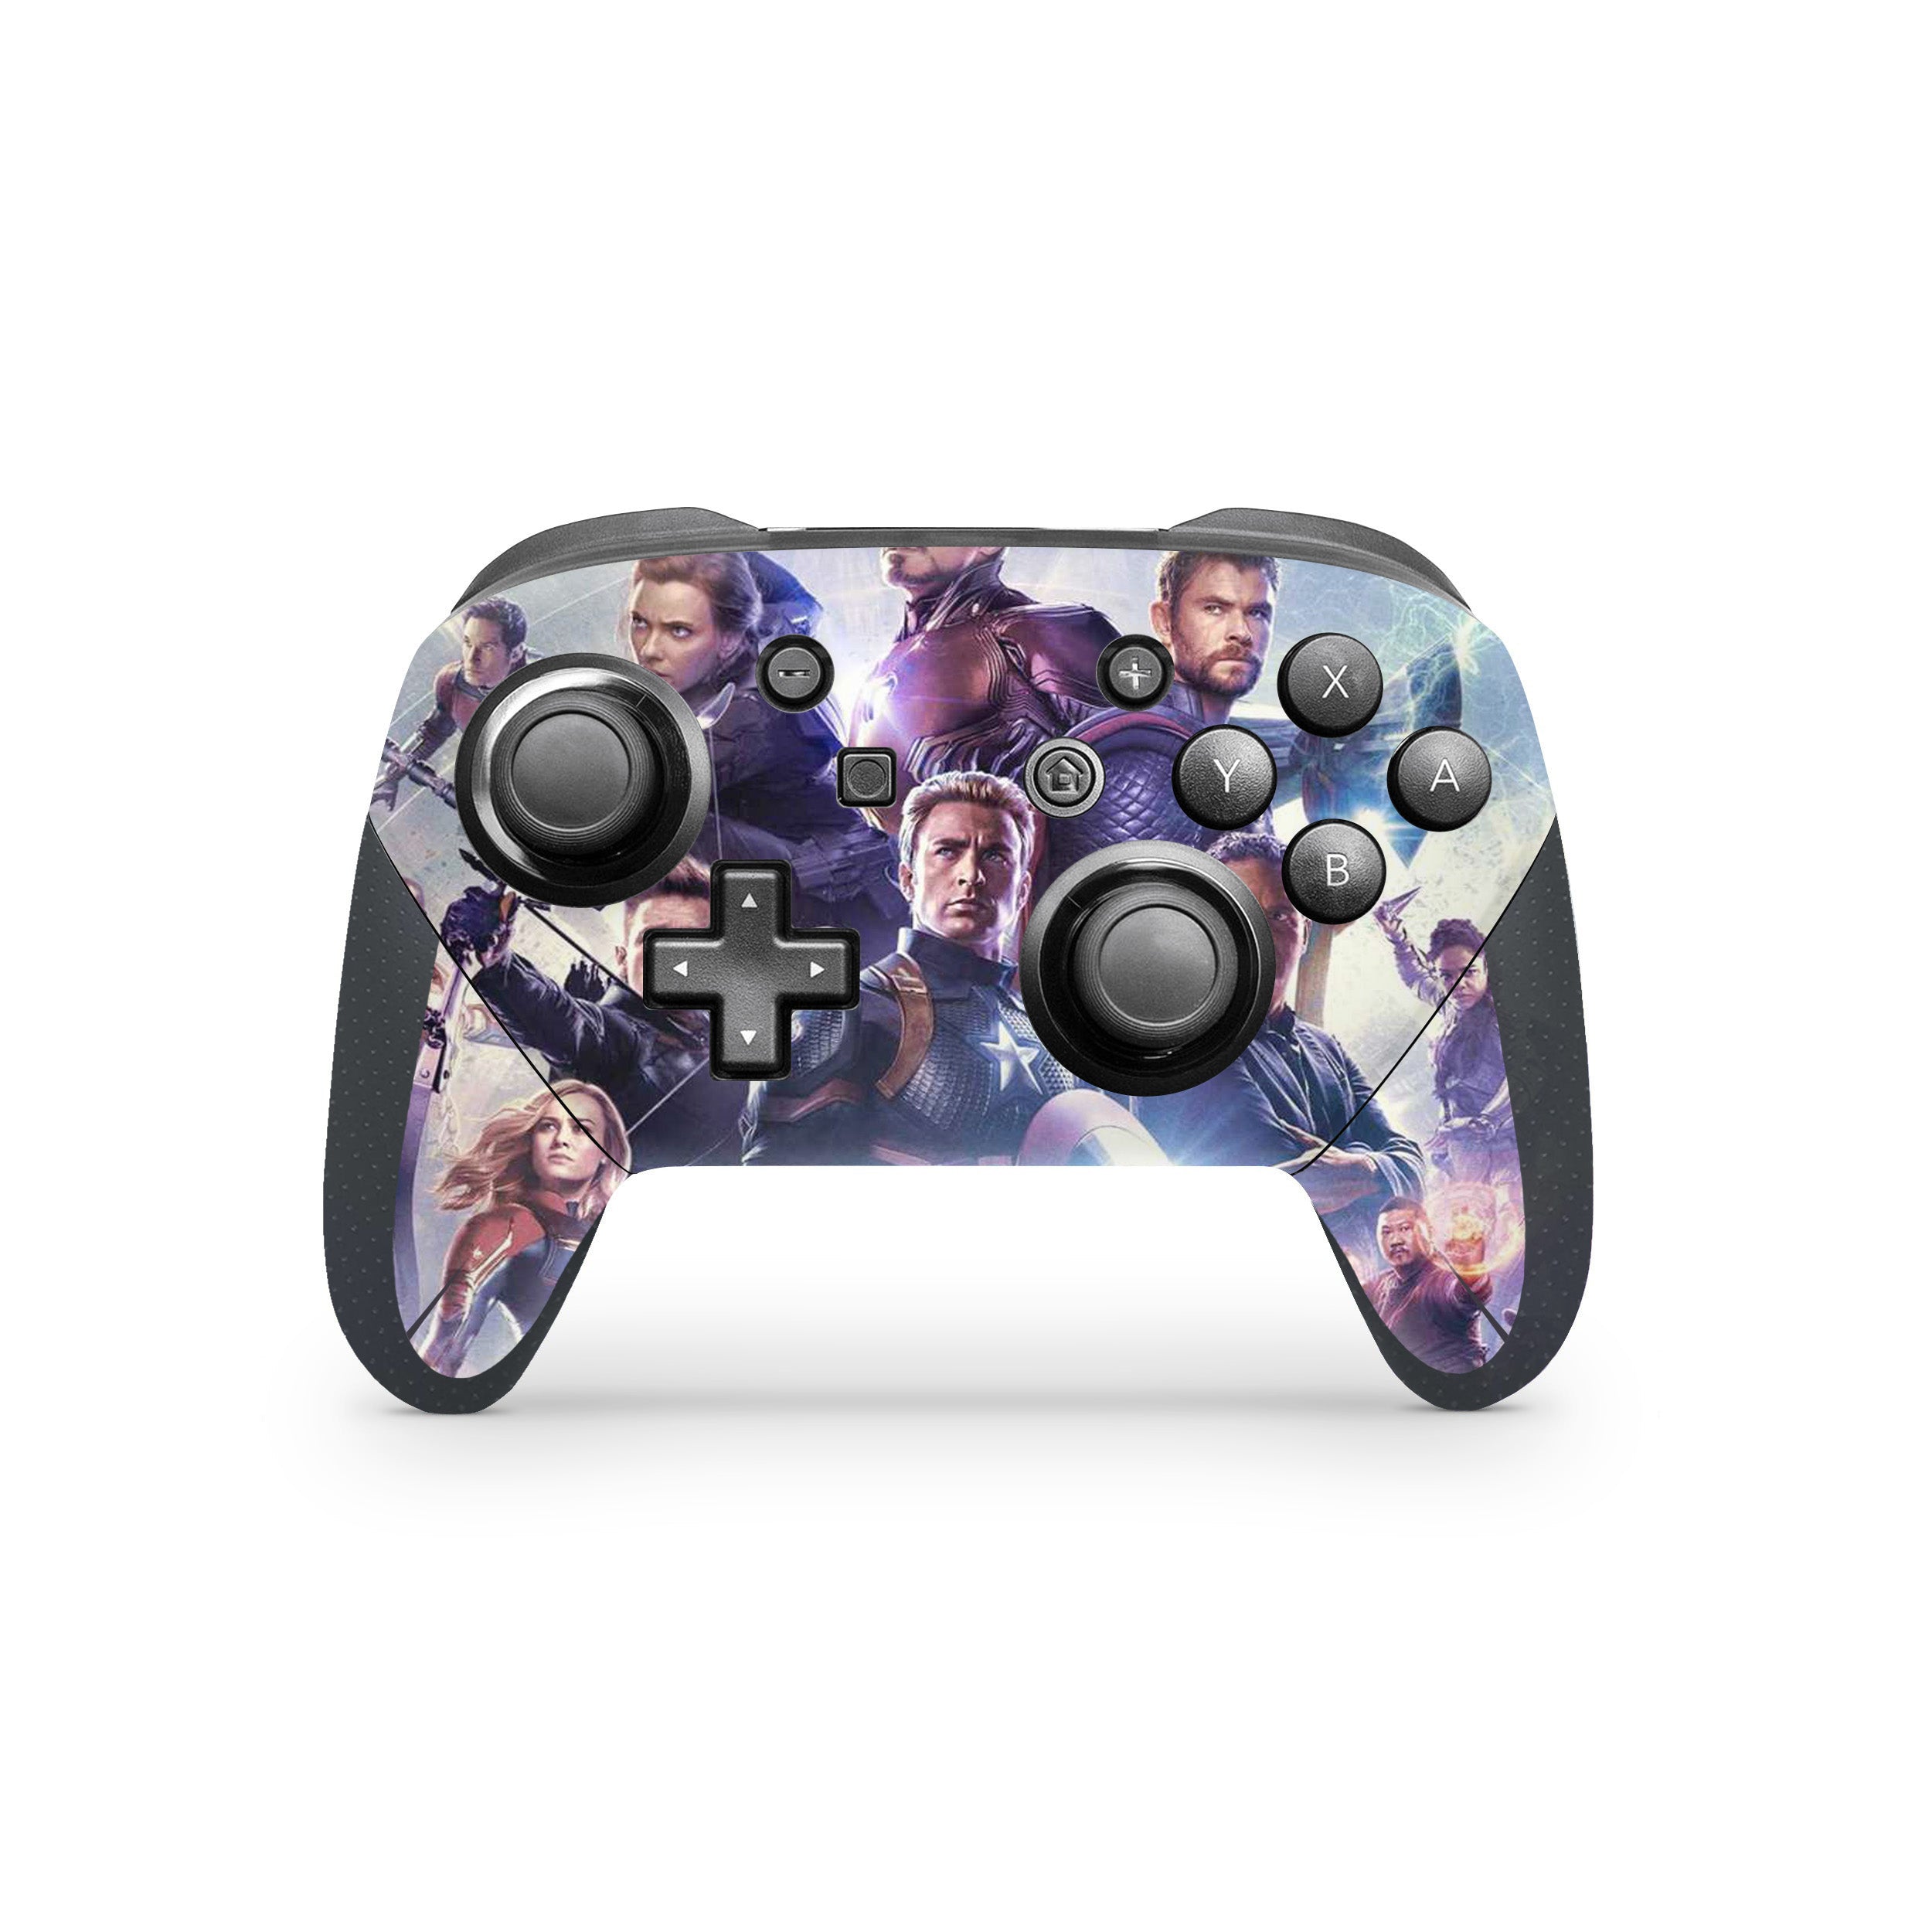 A video game skin featuring a Marvel Cinematic Universe design for the Switch Pro Controller.